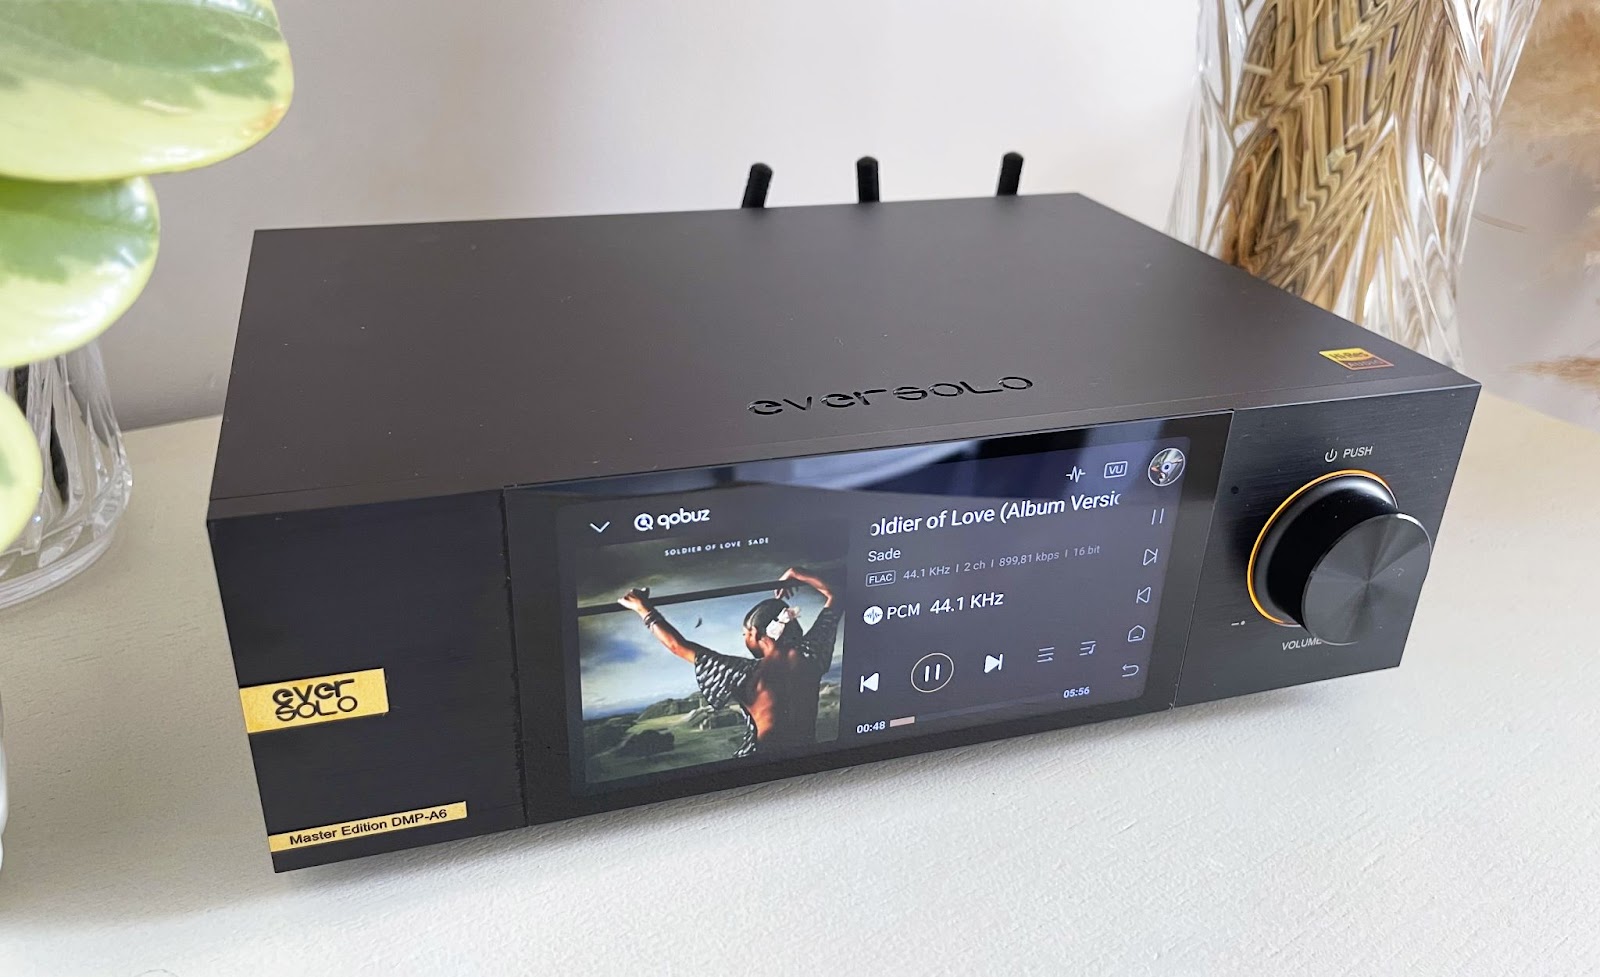 Eversolo DMP-A6 Master Edition streamer, preamp and DAC